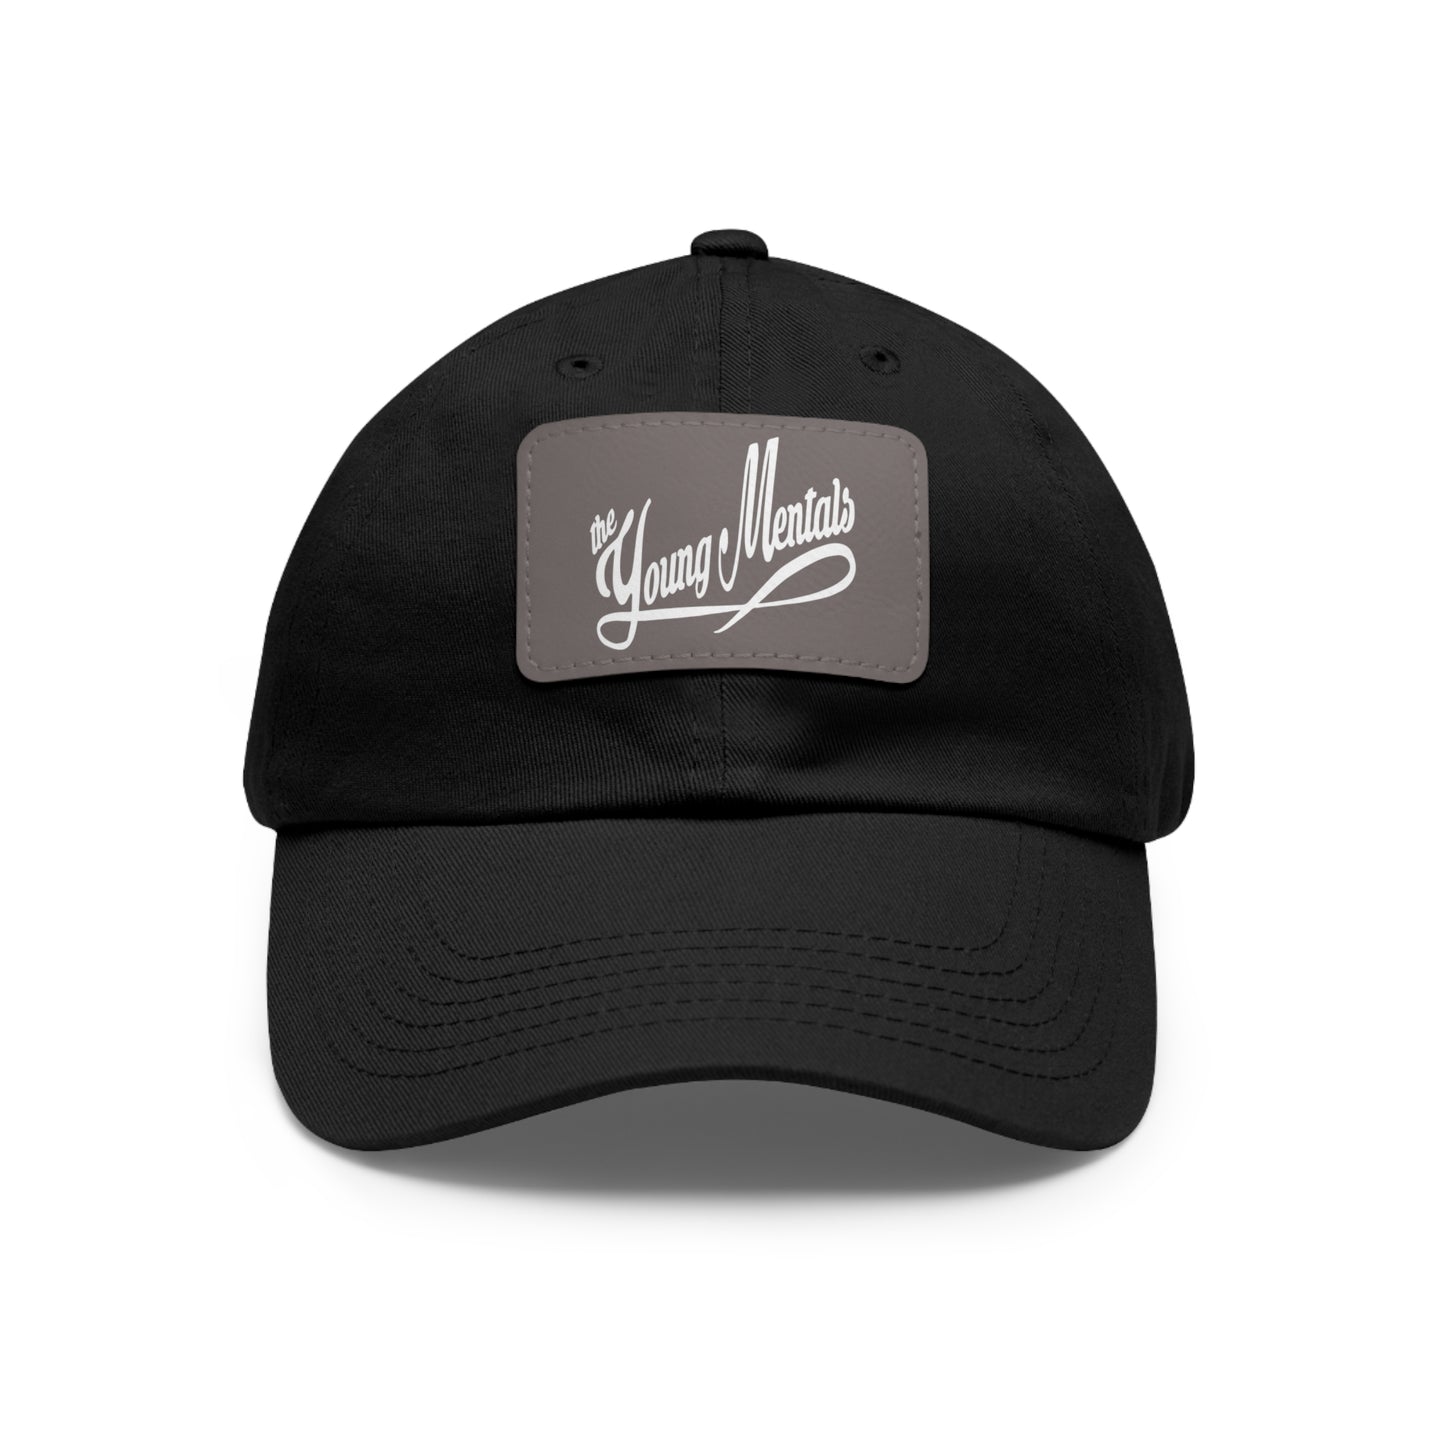 The Young Mentals Dad Hat w/ Leather Patch